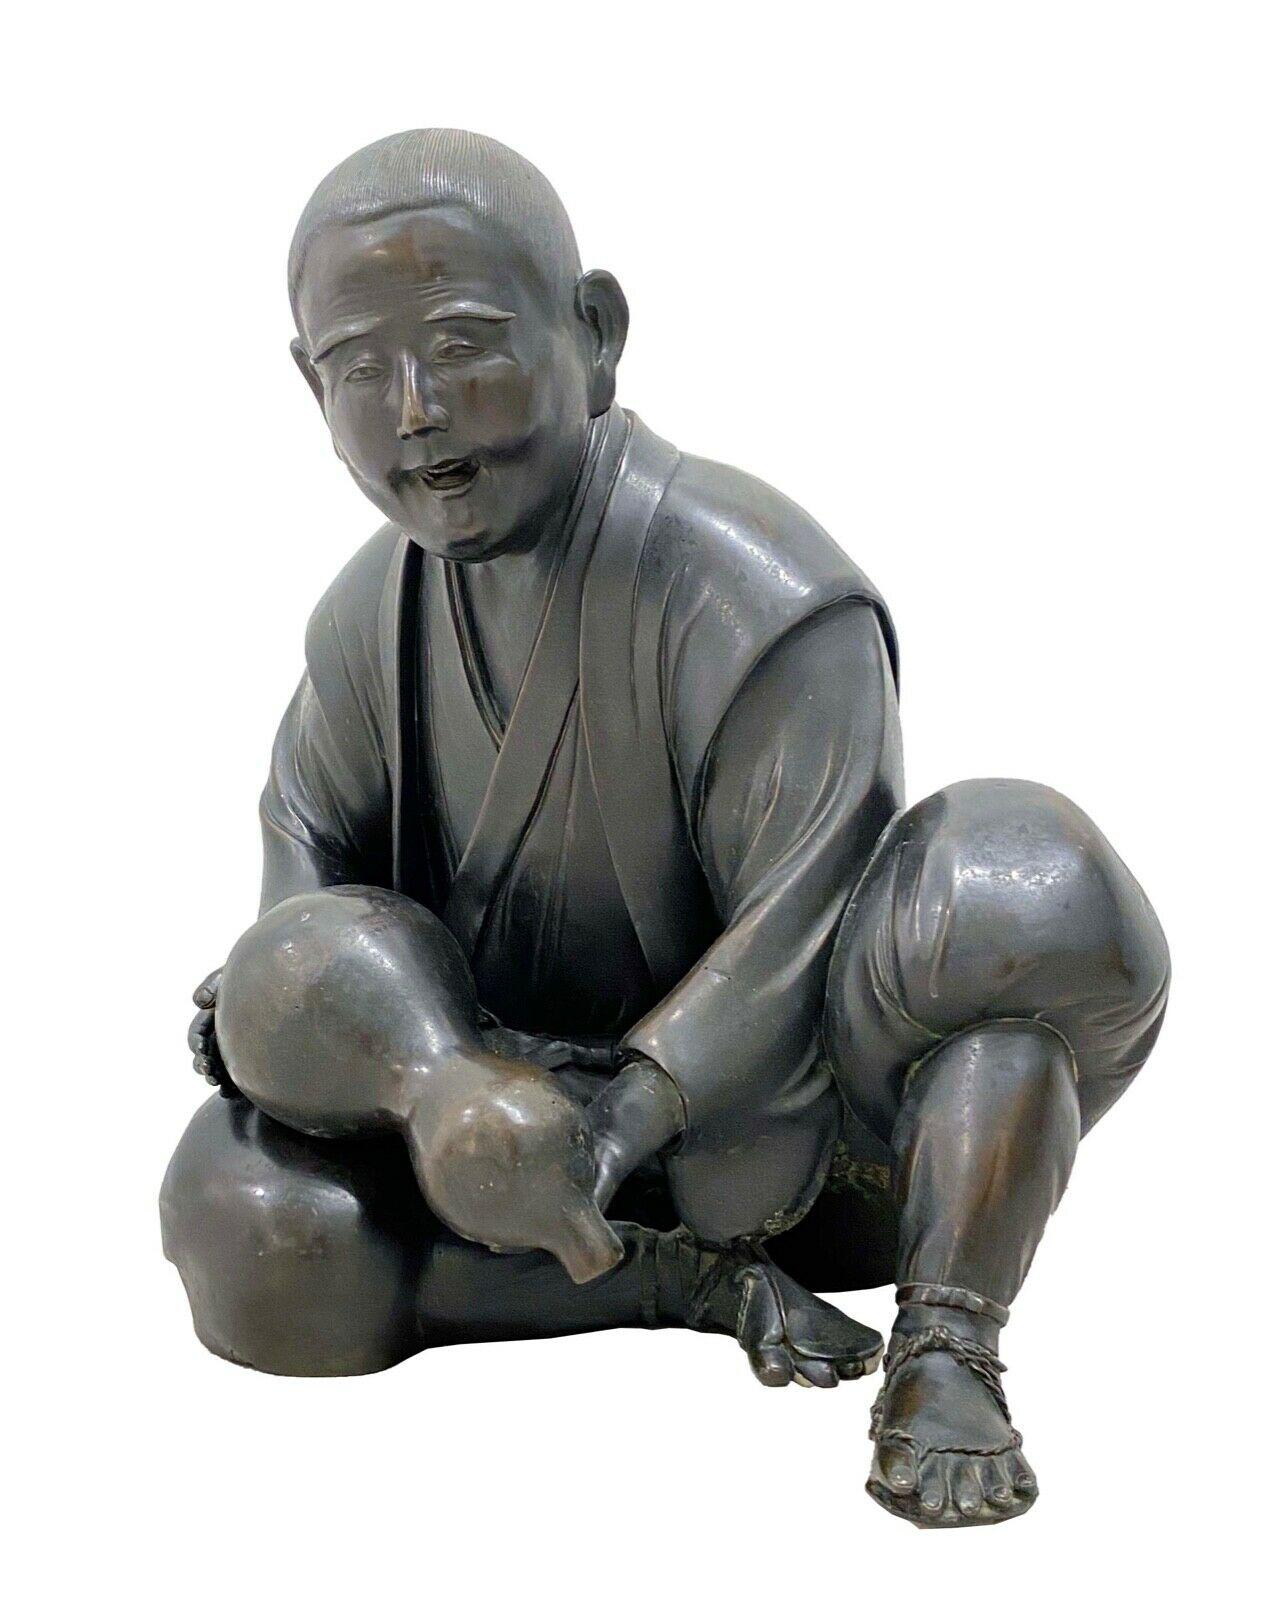 Vintage Chinese figurative scholar holding gourd. Incredible sculptural details. Monumental in size. His one hand is a bit dislodged from the opening. It was cast as a separate piece.
 
Dimensions: 19 W X 15.5 D X 21.5 H.